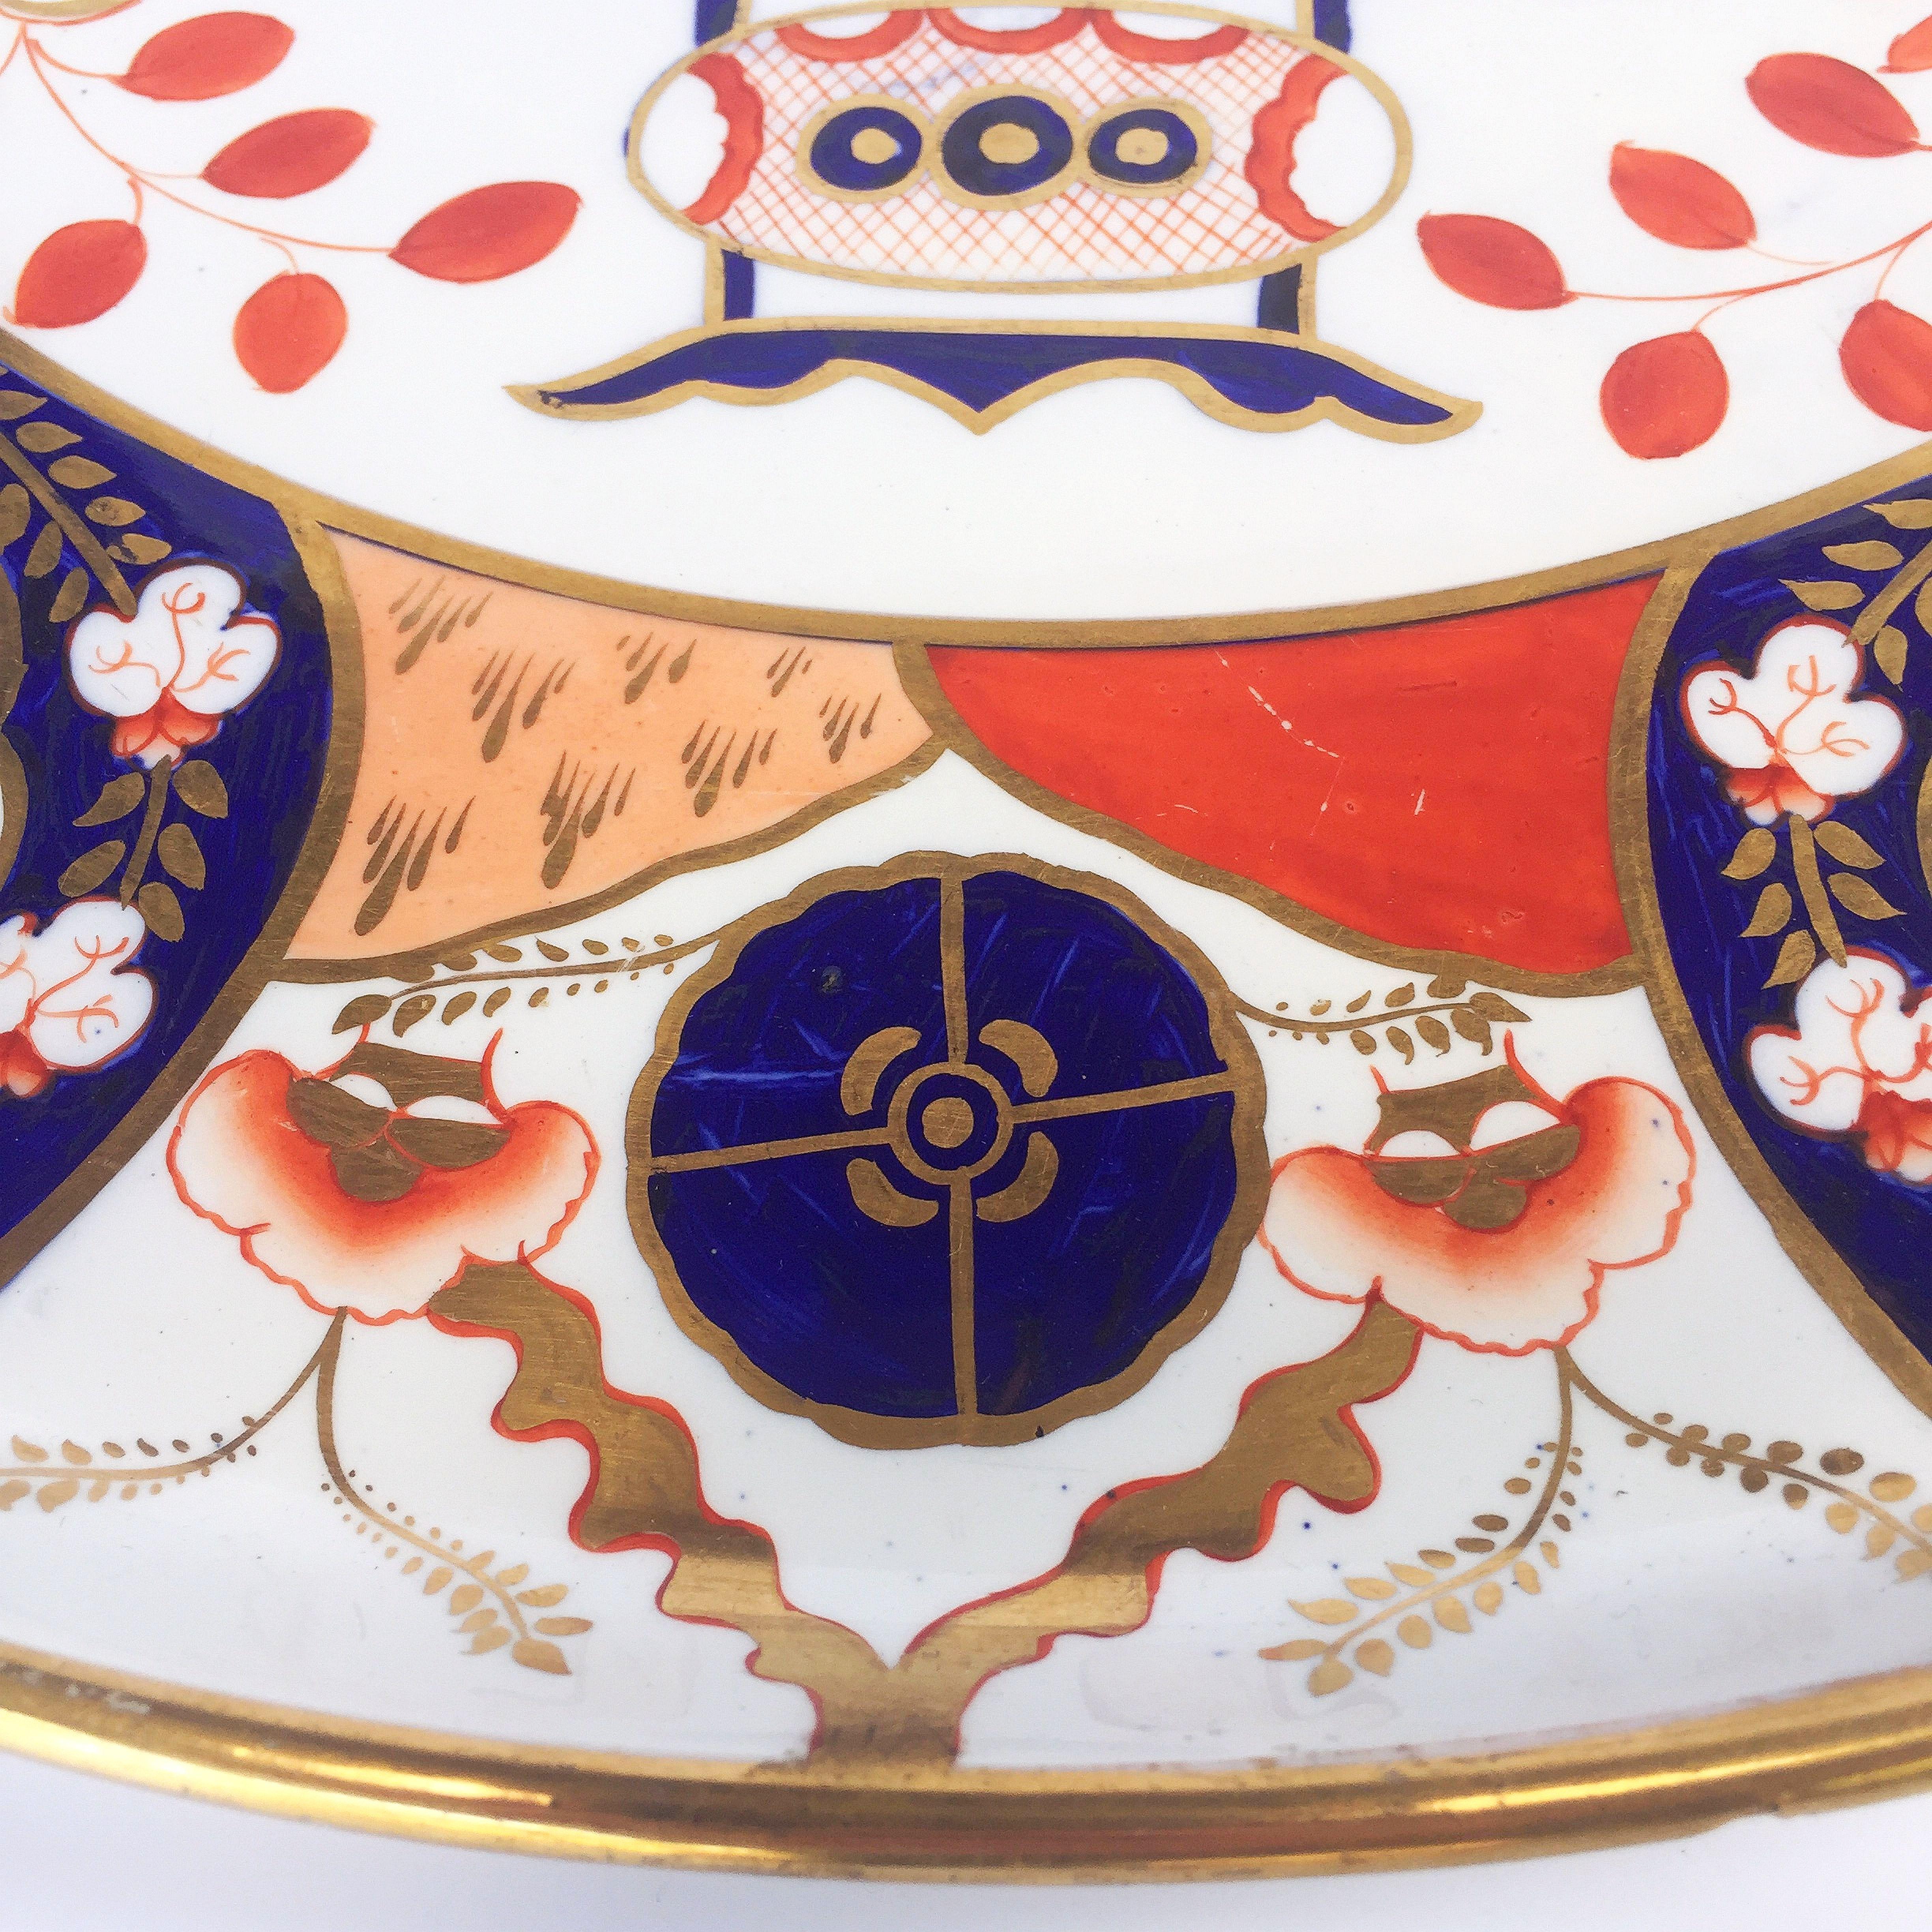 Large 19th c. English Imari Polychrome Charger with Gilt Accents by Copeland For Sale 4